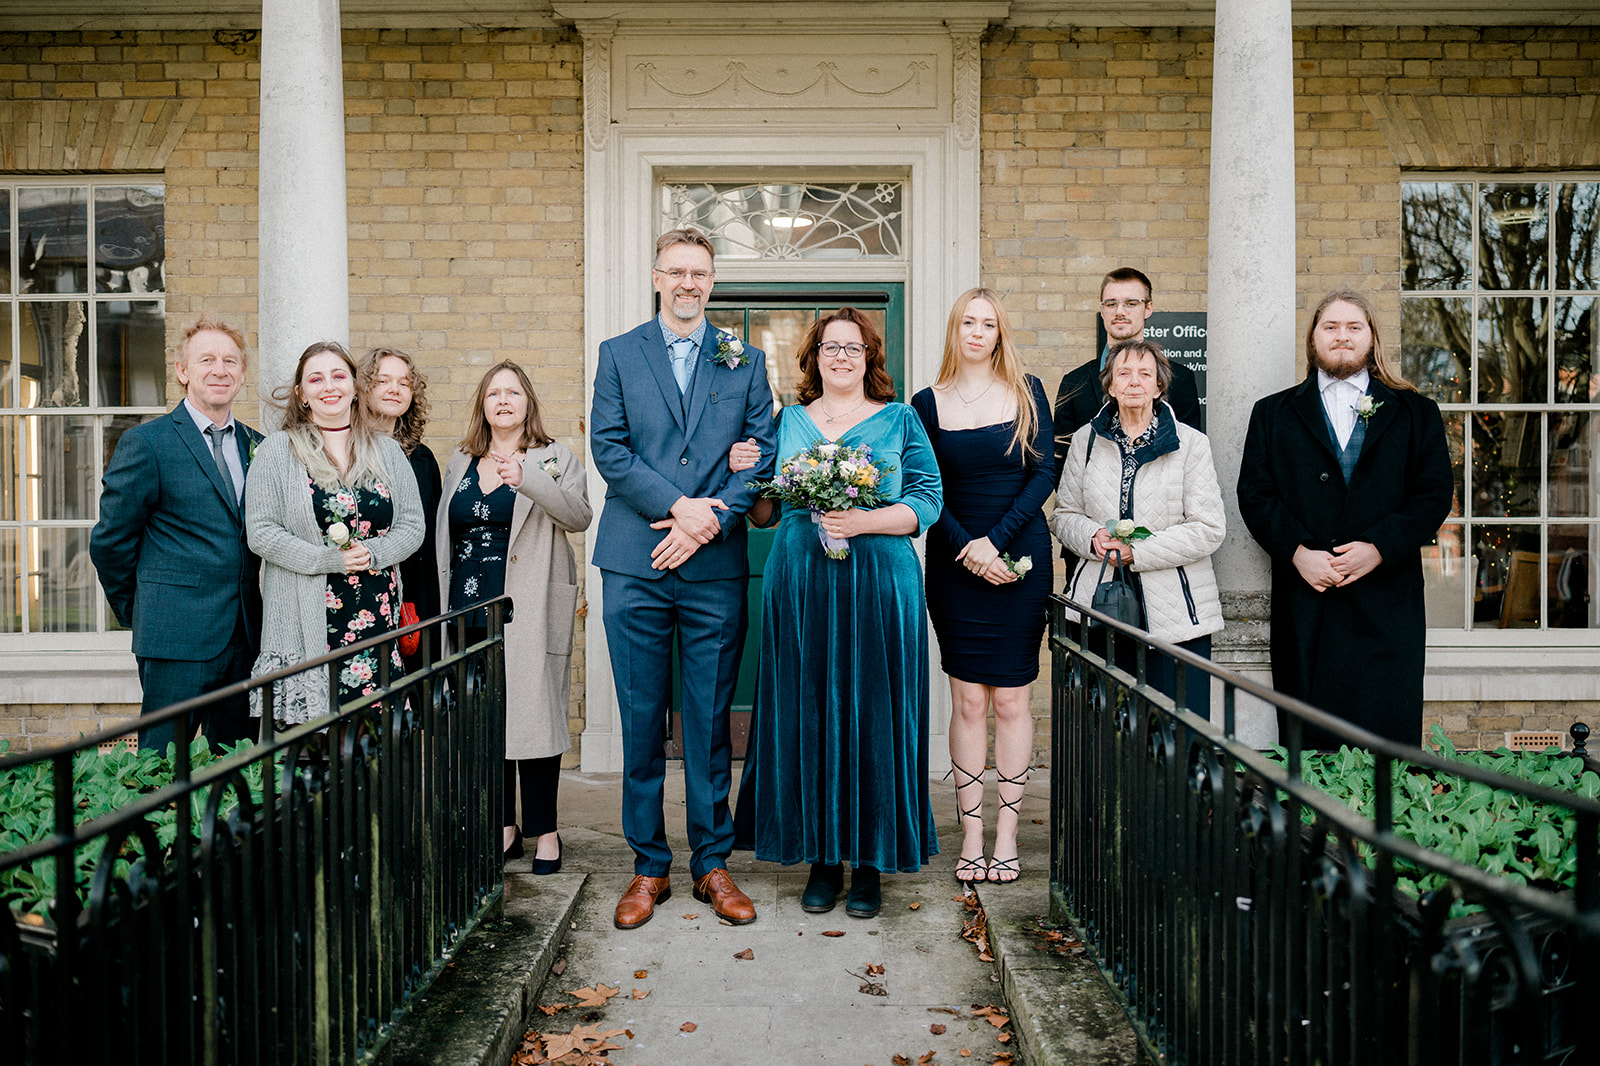 Outdoor photo of married couple and wedding guests Basingstoke Registry Office.